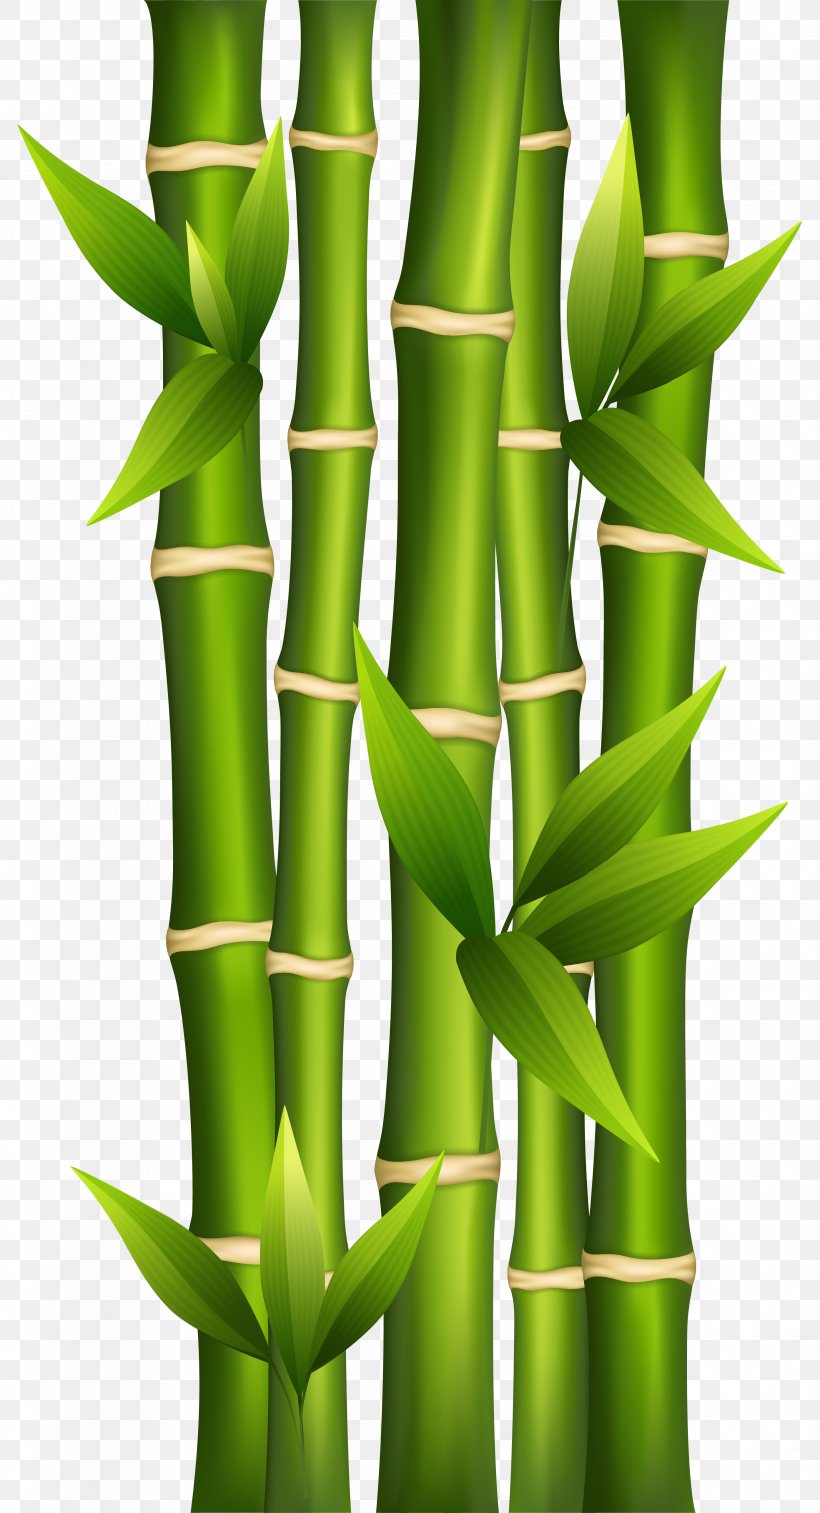 Bamboo Shoot Plant Stem Clip Art, PNG, 2787x5144px, Bamboo, Bamboo Shoot, Fotosearch, Grass, Grass Family Download Free